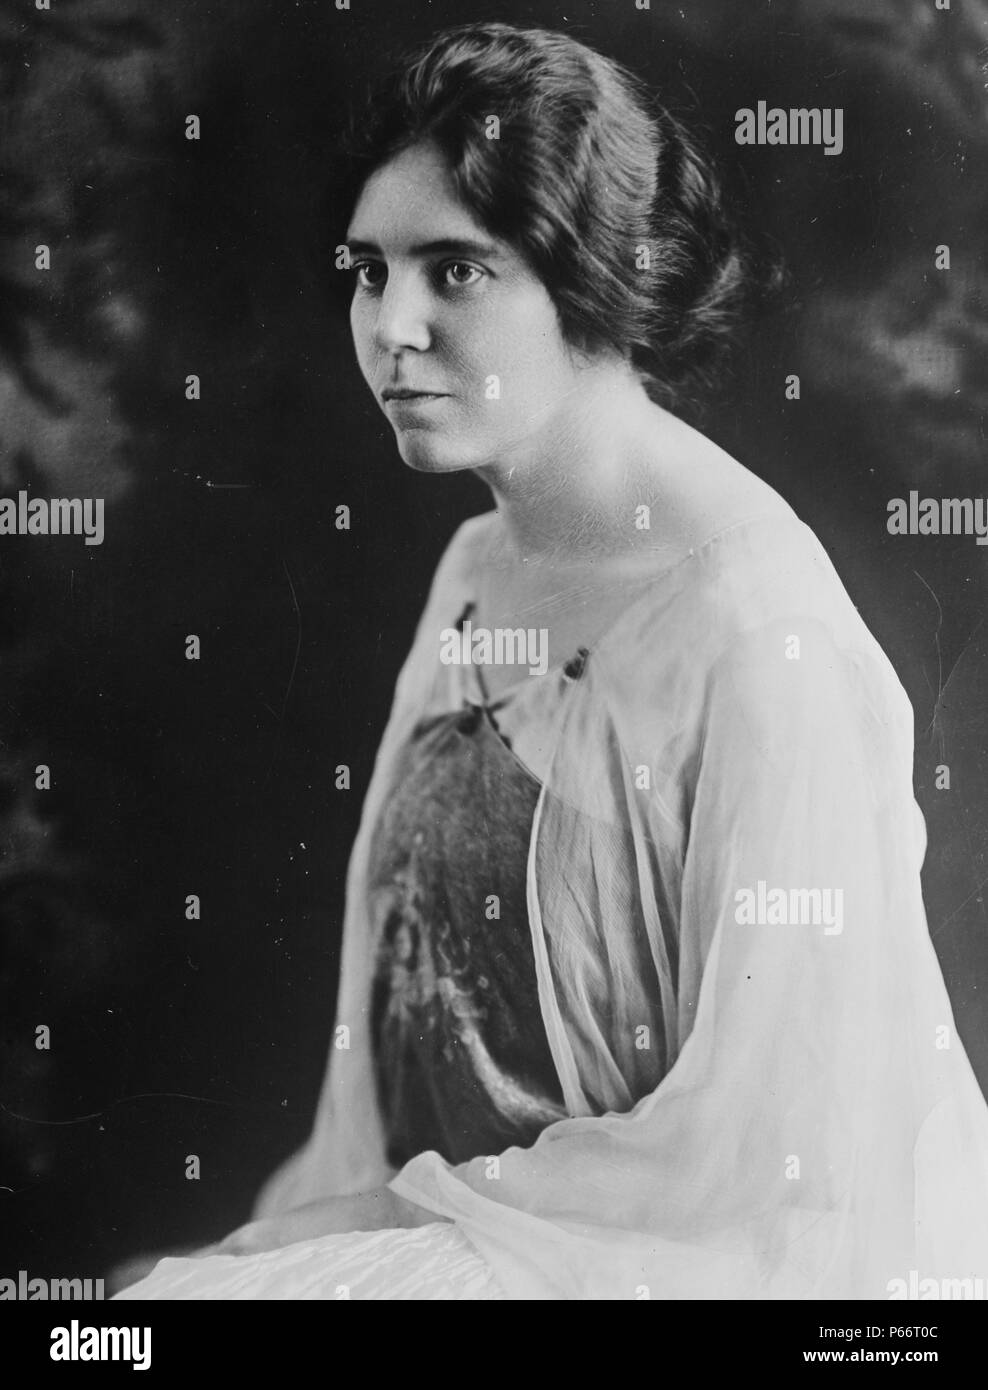 Alice Paul, born 1885 died 1977. American feminist and social reformer, born into a Quaker family in Moorestown, New Jersey. She was educated at Swarthmore College and Pennsylvania University, where she gained a PhD in 1912. She spent some years in England, becoming involved in the militant branch of the suffrage movement and was arrested several times and imprisoned. From 1912, back in the USA, she formed the Congressional Union for Woman Suffrage. Her forceful personality attracted wide support and equally wide mistrust. She devoted her whole career to fighting for equal rights for women. Stock Photo